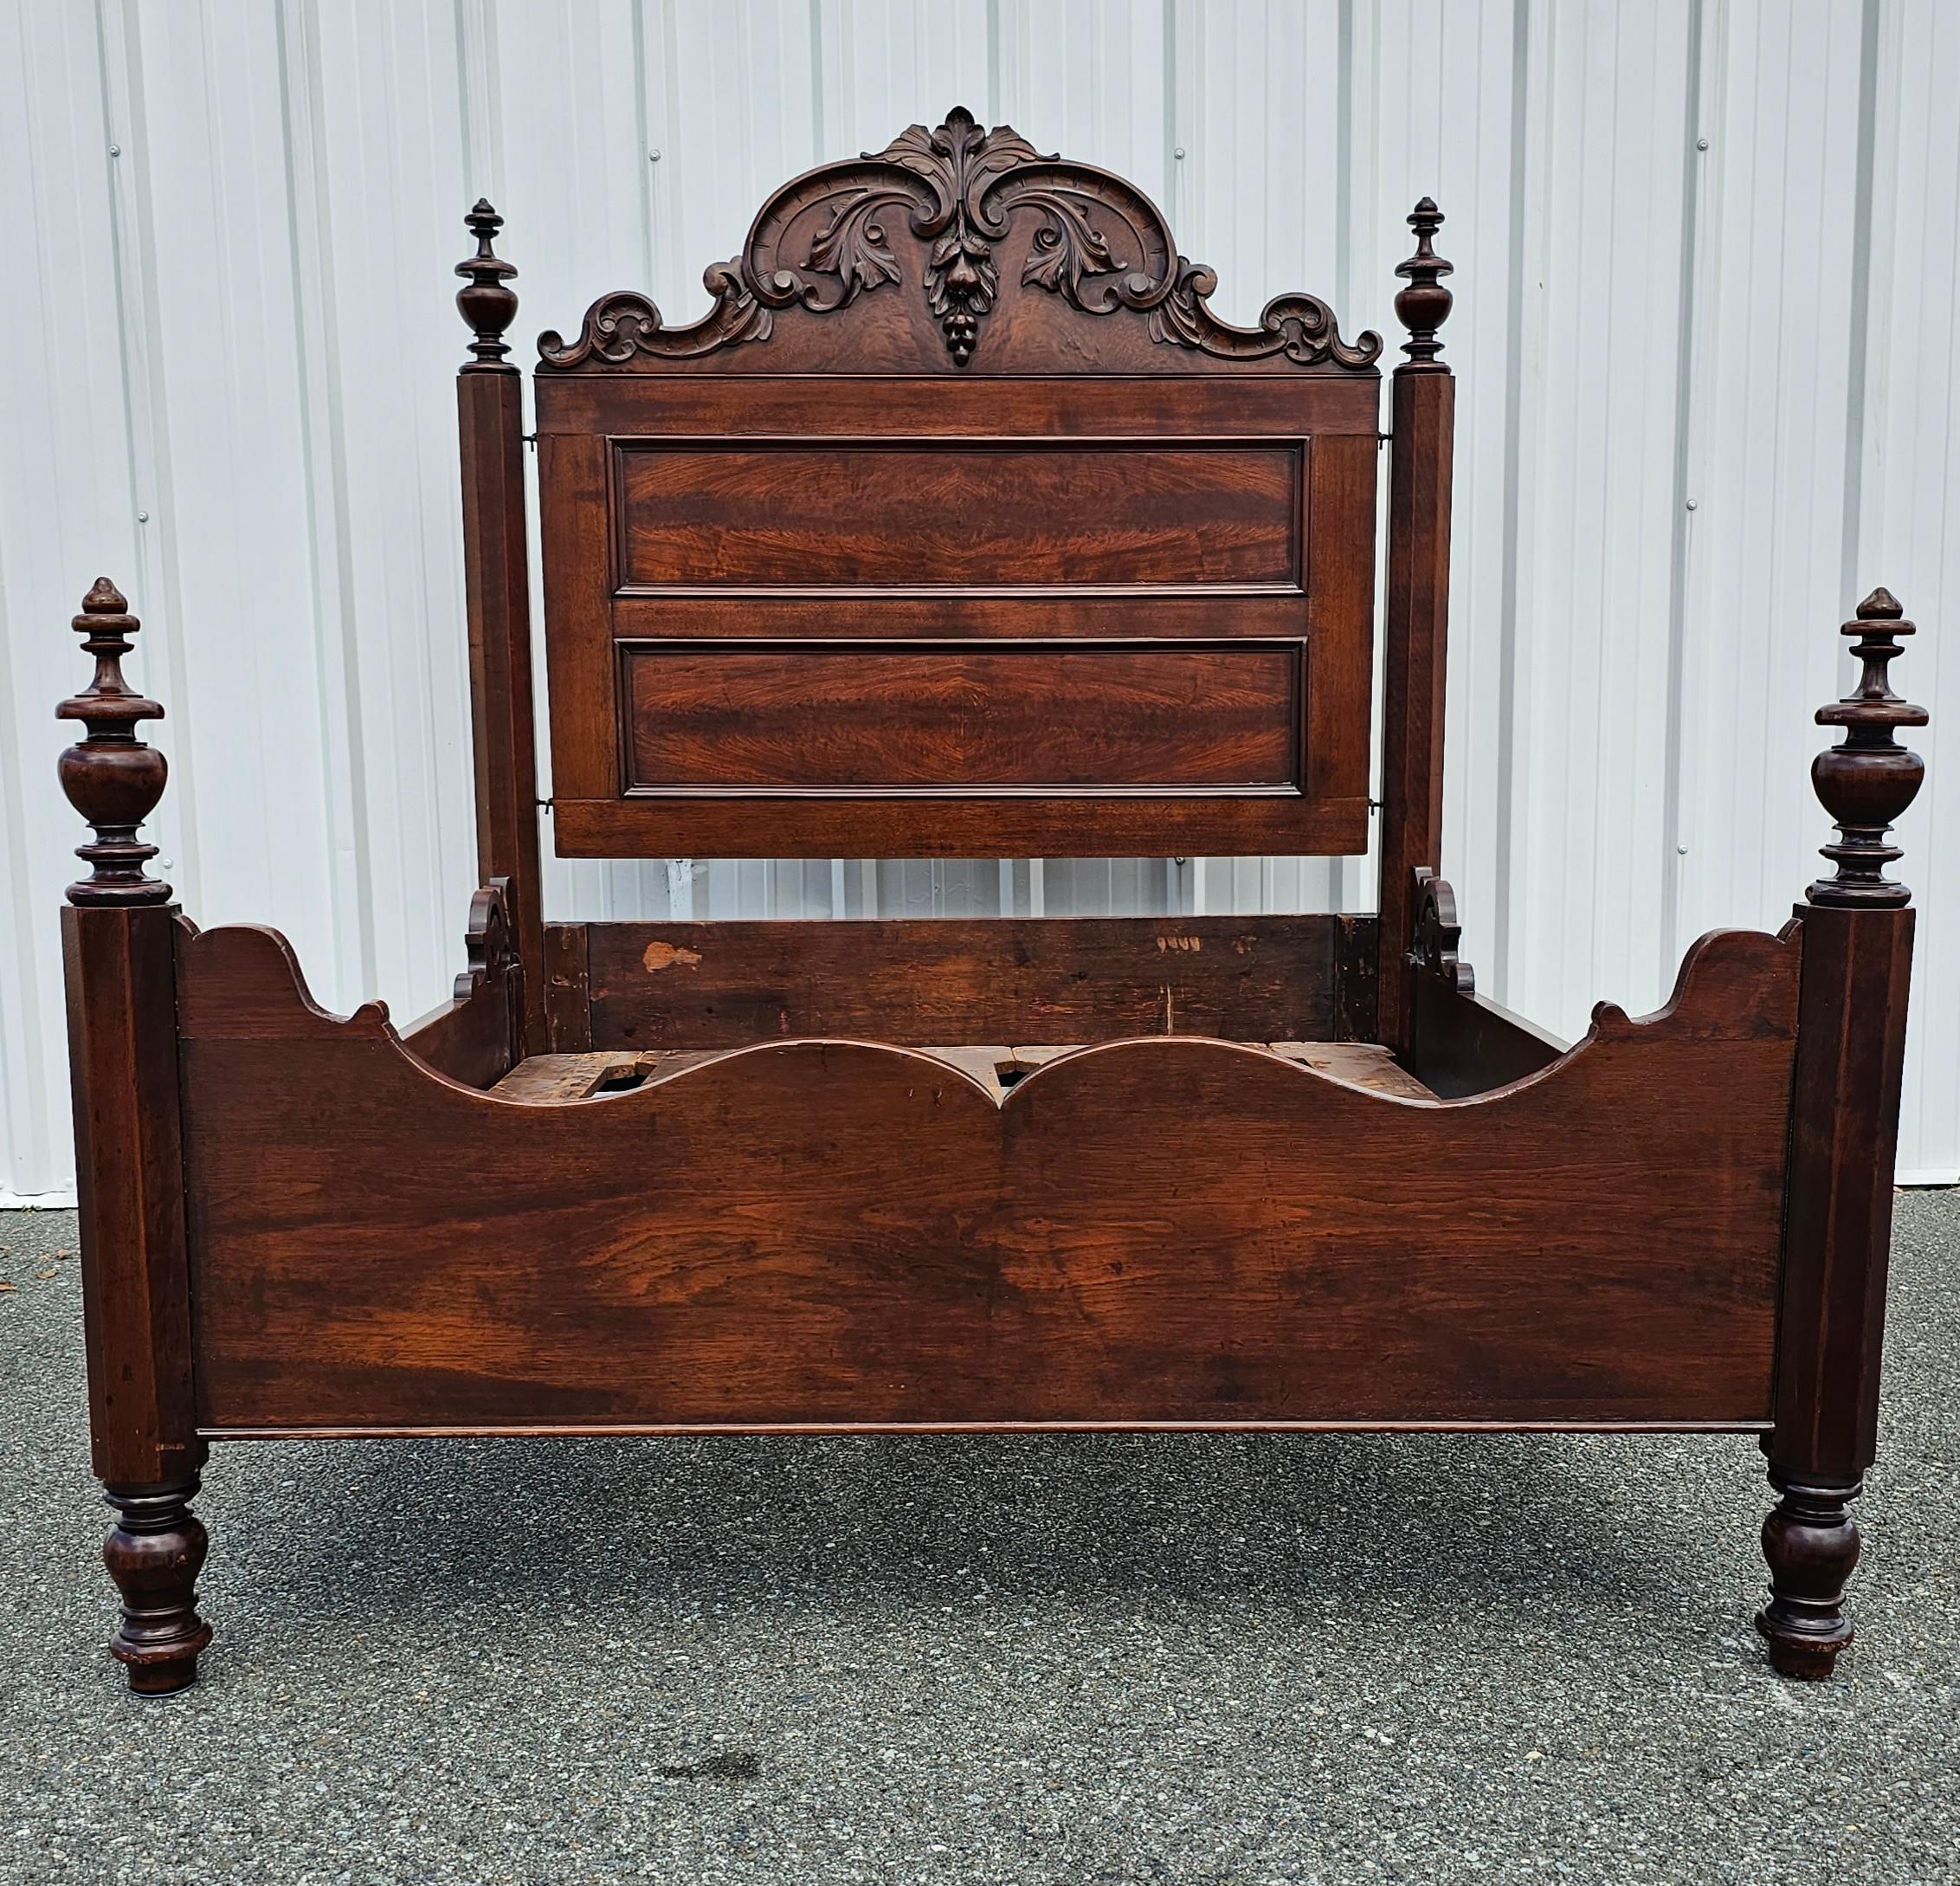 An American Victorian Rococo Revival carved Walnut bedstead, mid-19th century, attributed to Prudent Mallard, New Orleans.
The is antique has just been completely refinished, with a sophisticate and intricacately carved crest over a double panel